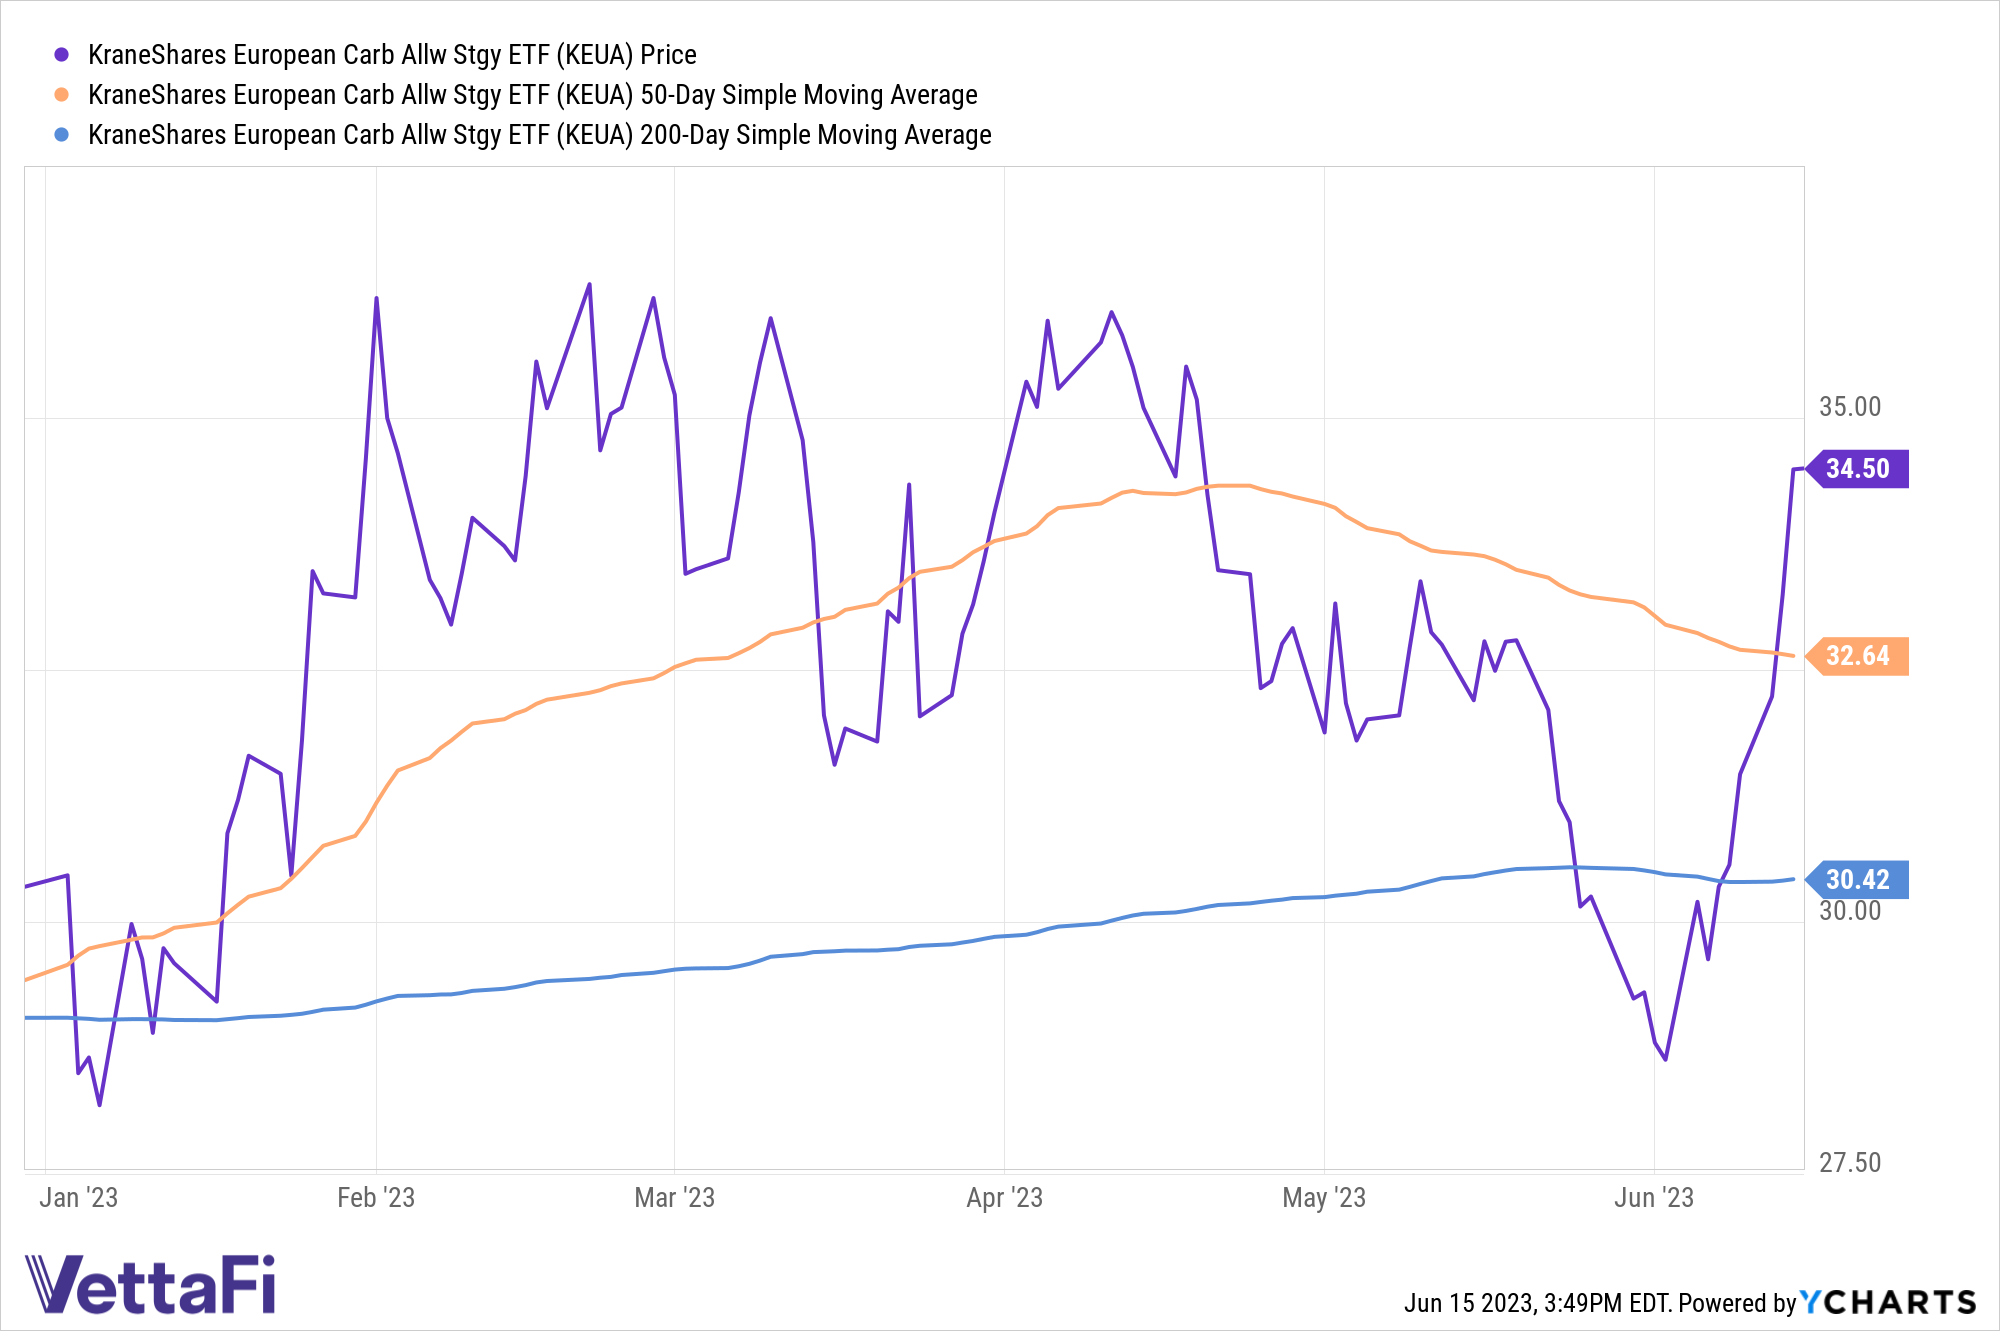 Price graph YTD of KEUA (34.50), its 50-day SMA (32.64) and its 200-day SMA (30.42).